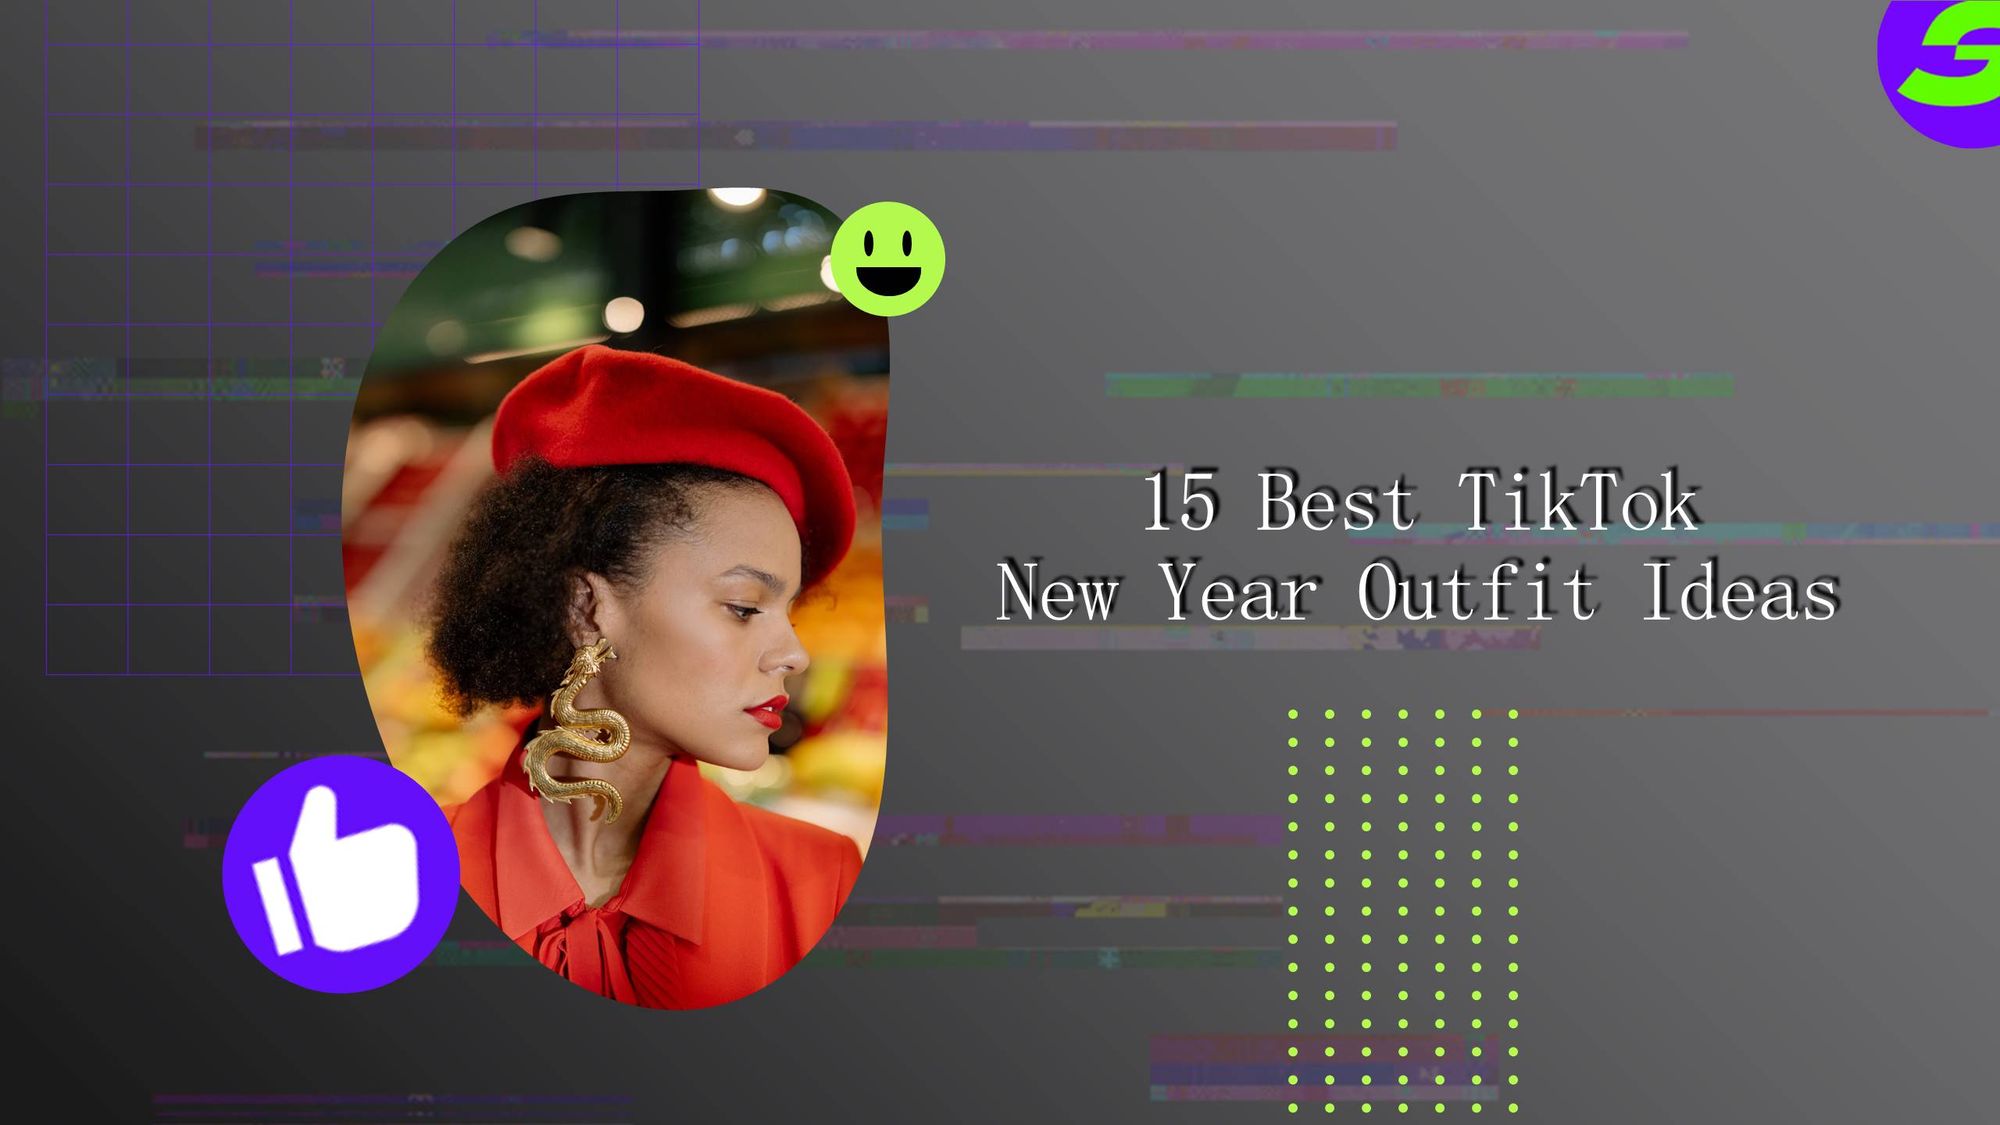 Top 15 ideas for TikTok New Year Outfit ShotCut Video editor